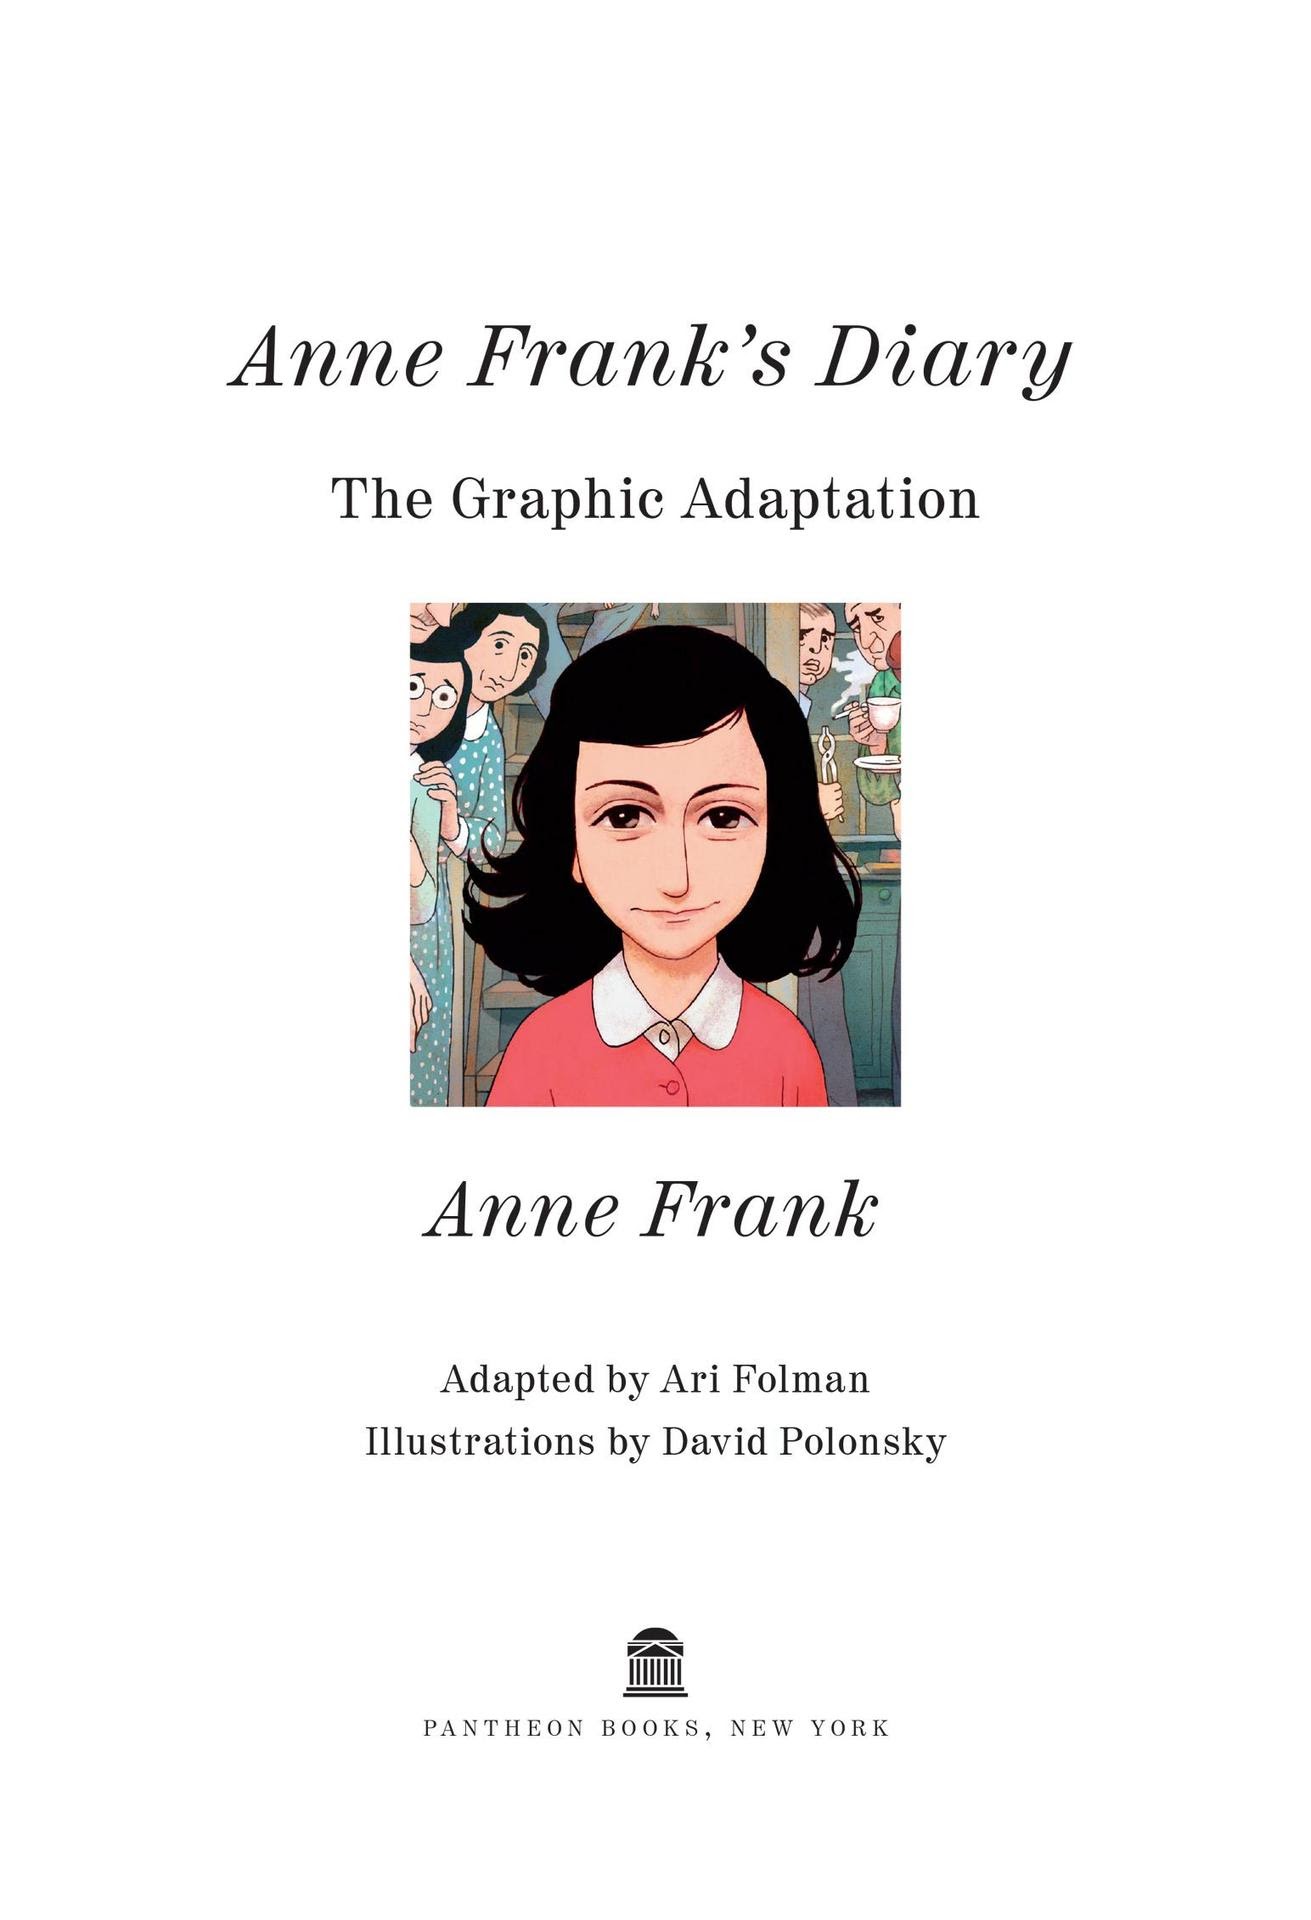 Read online Anne Frank’s Diary: The Graphic Adaptation comic -  Issue # TPB - 3